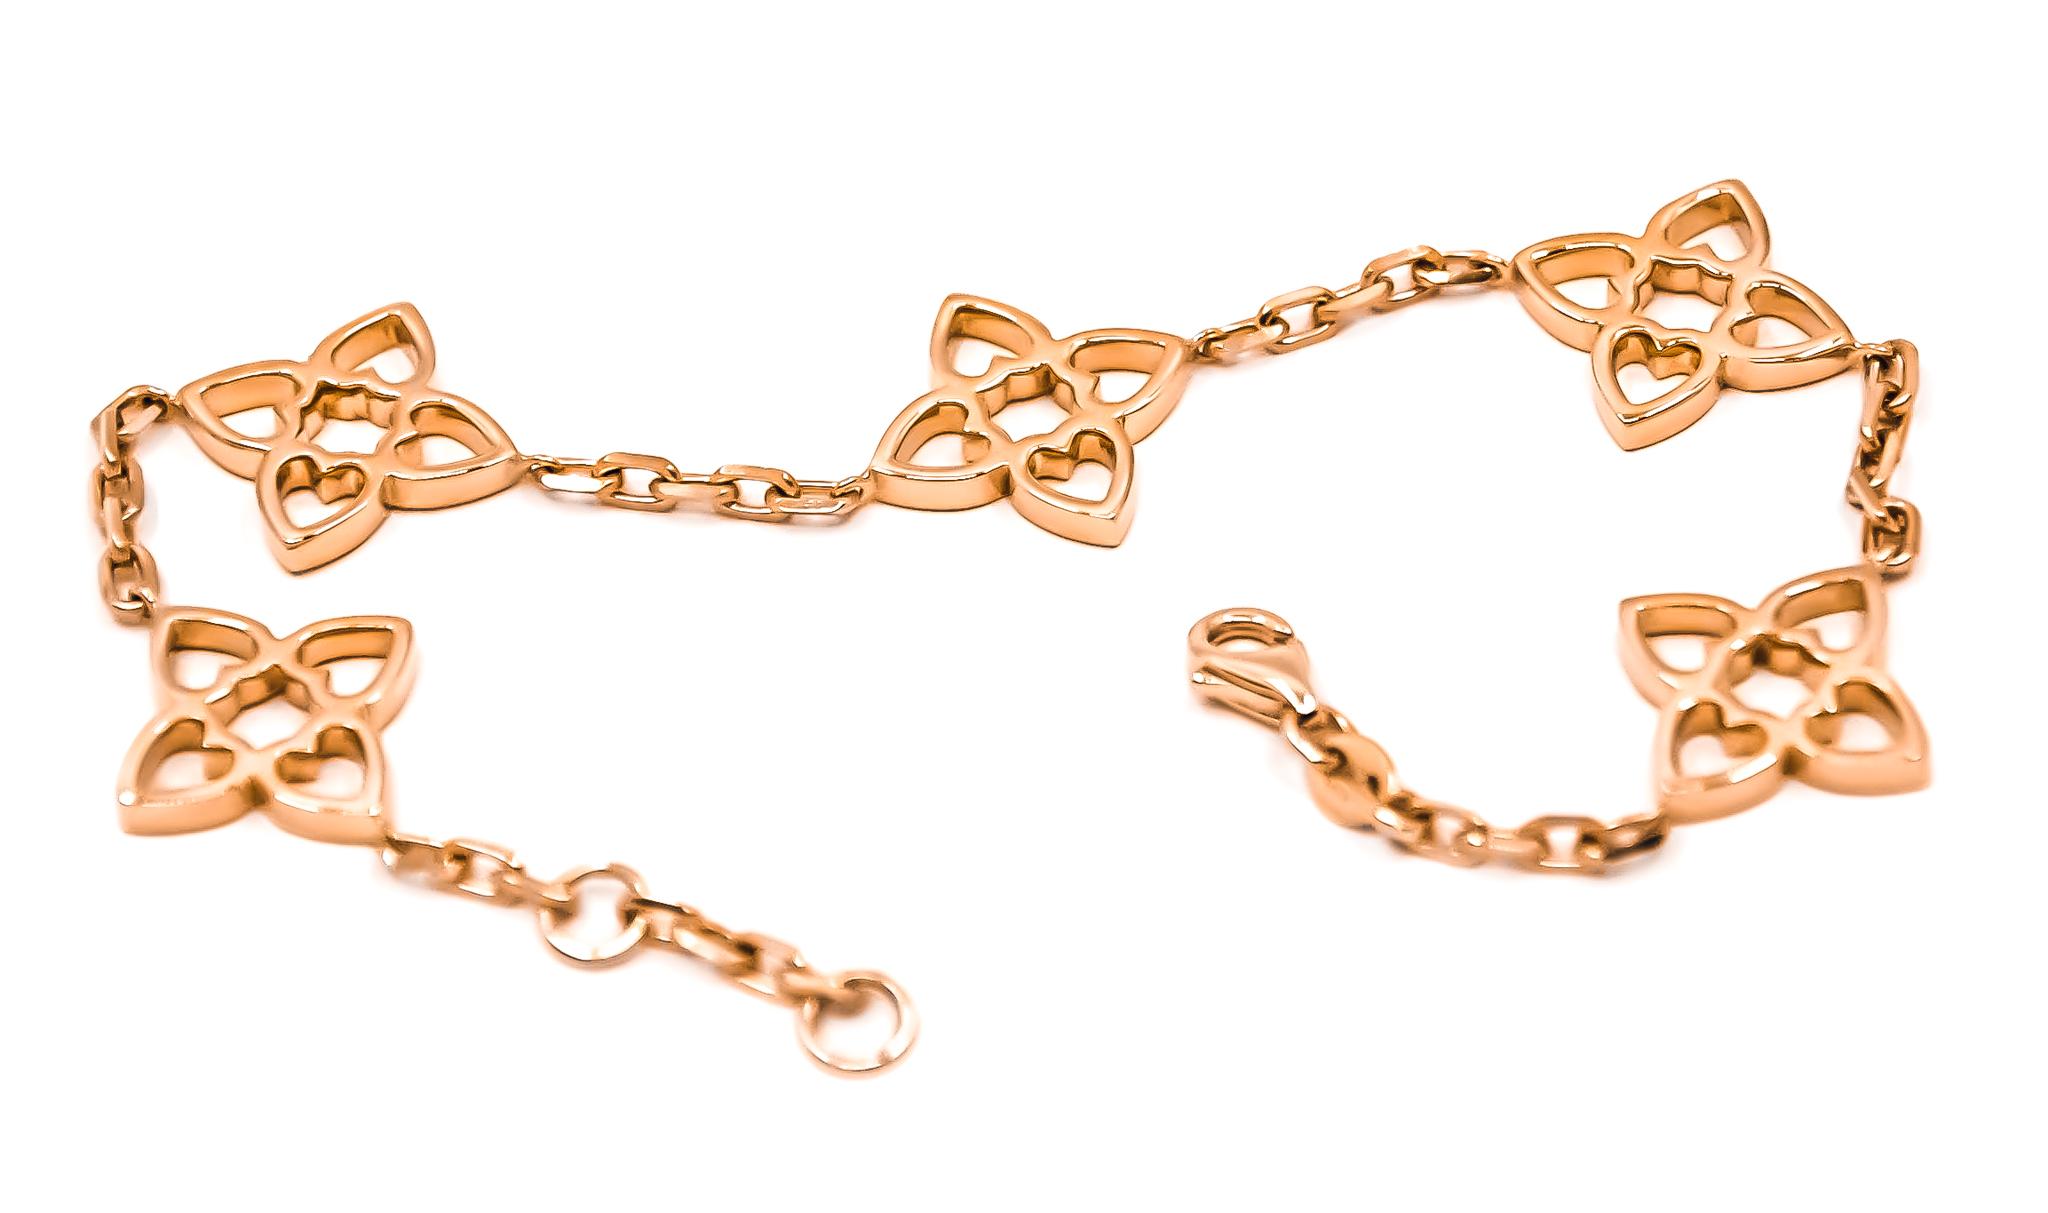 18kt solid rose gold 5 motif bracelet by Mohamad Kamra from the Connected Hearts Collection.

Bracelet can be made in any wrist size.